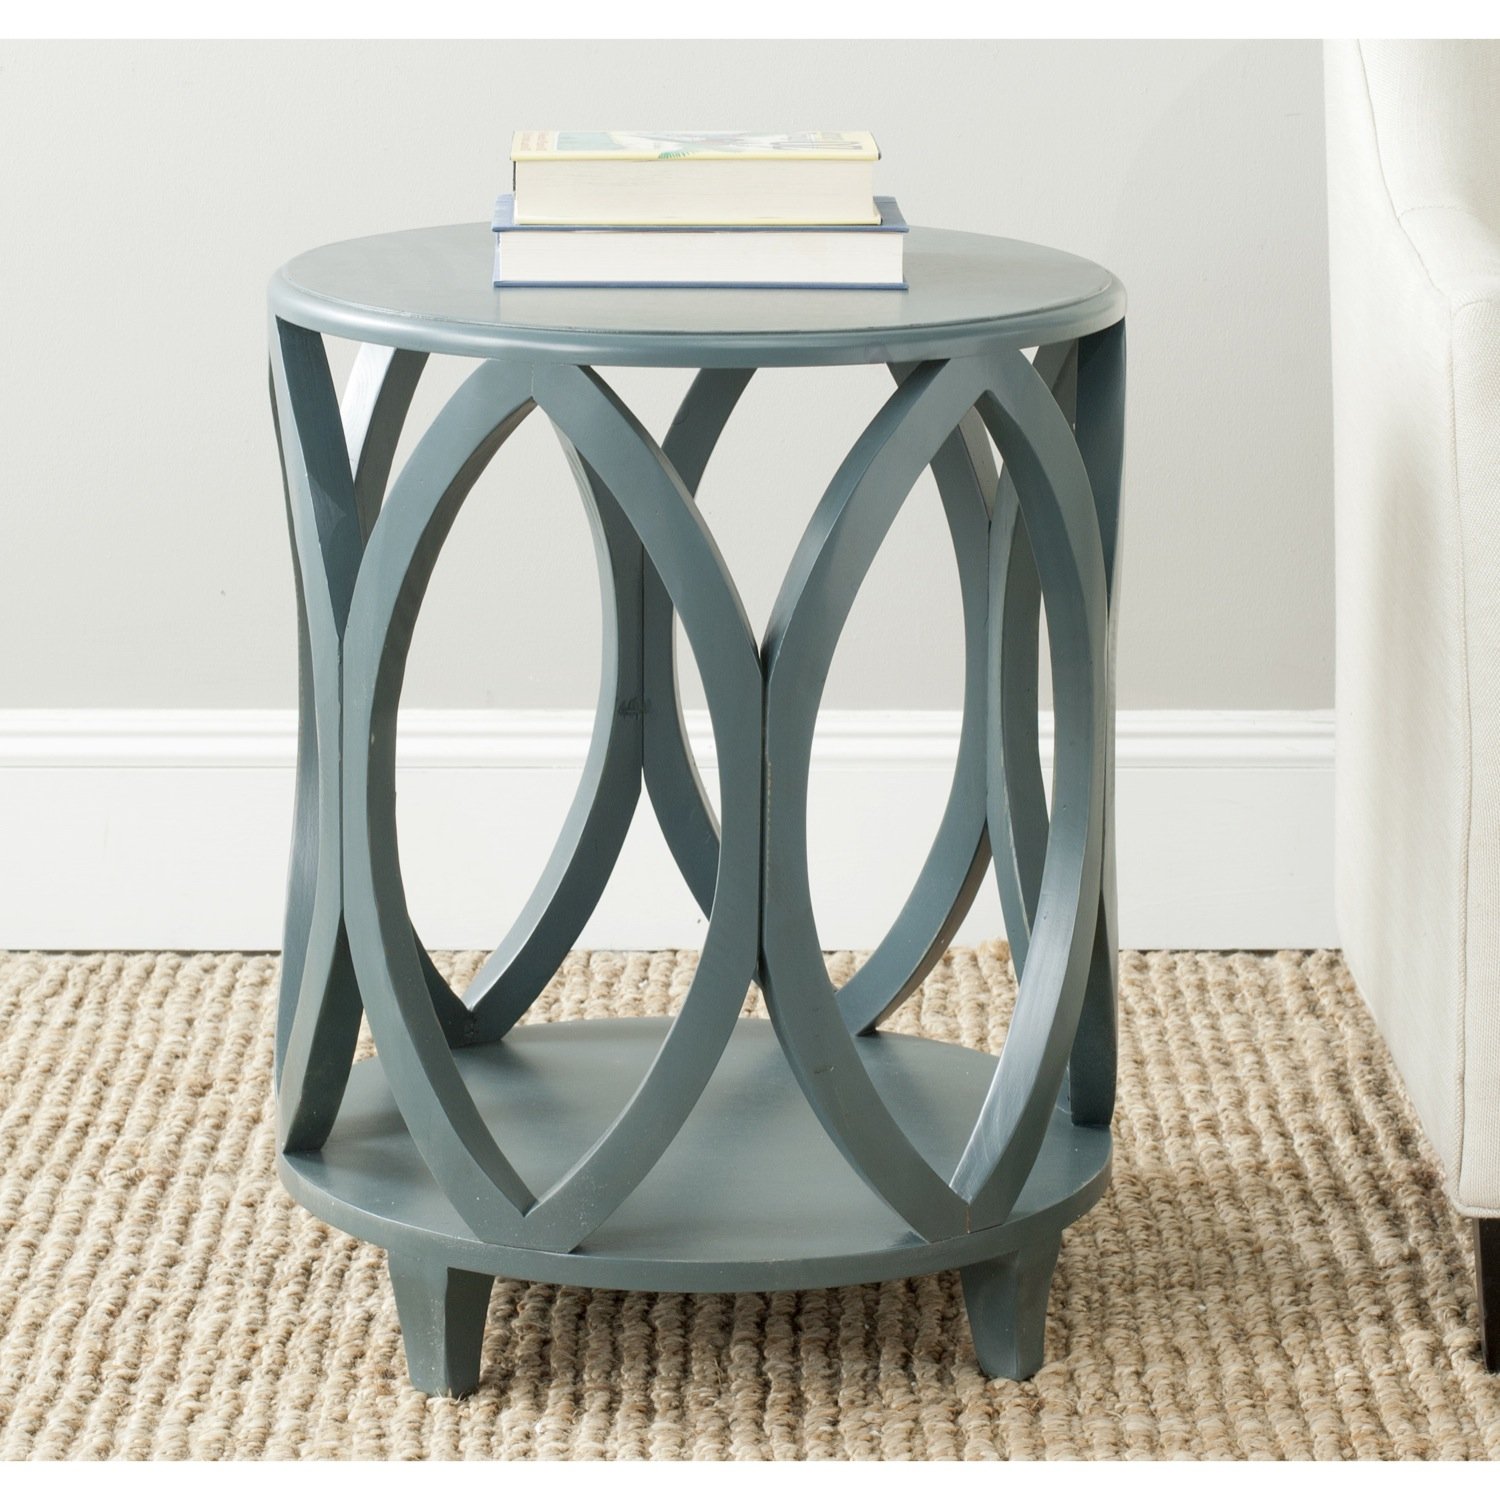 safavieh american homes collection janika steel teal accent table off white kitchen dining ultra modern end tables small bedside light mats cabinet glass entrance bathroom